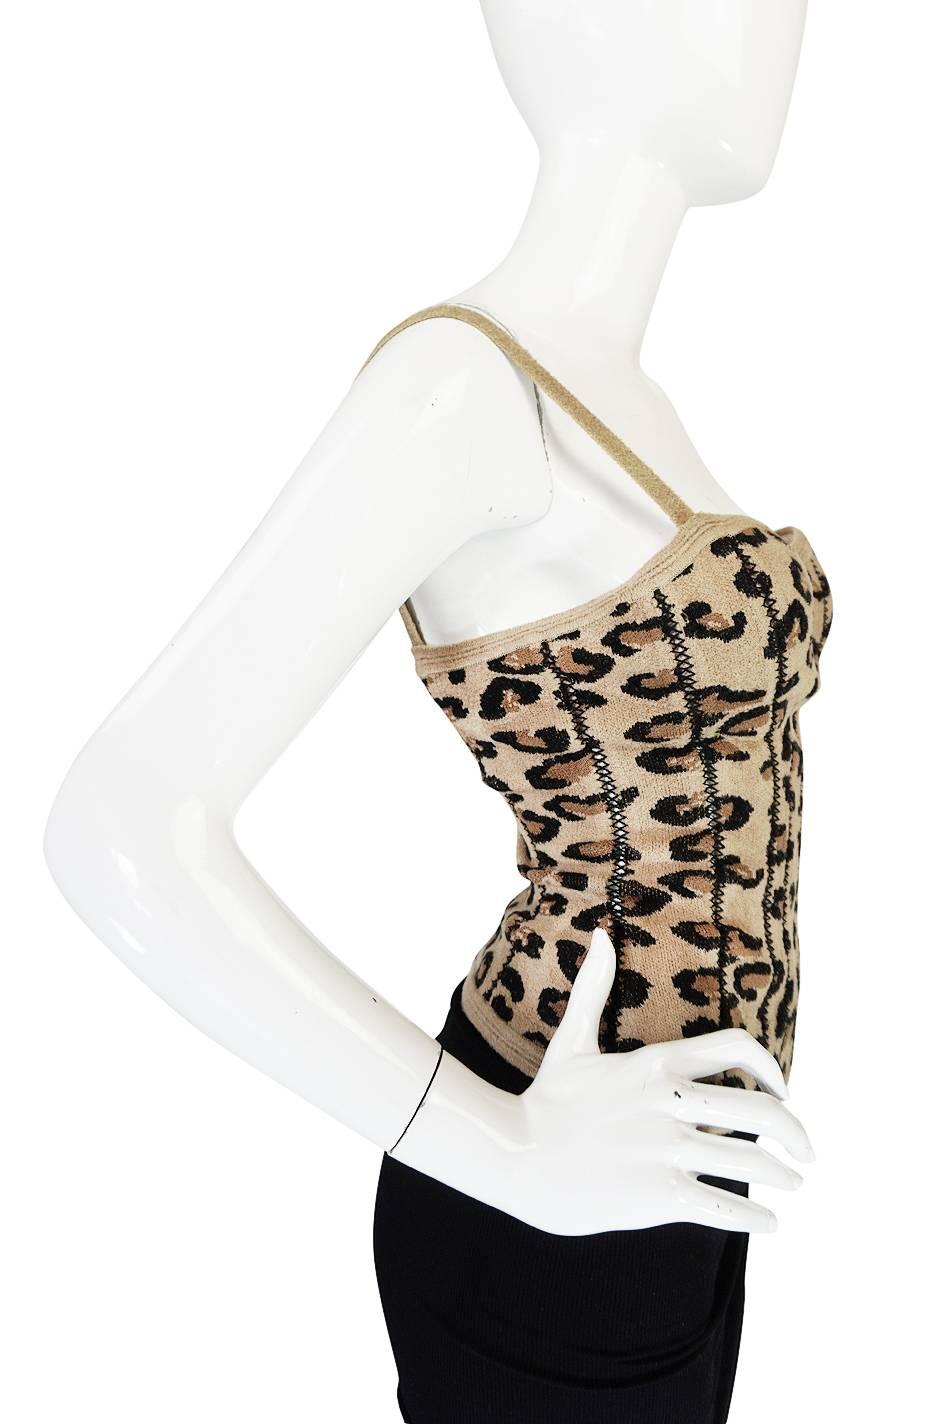 Women's Iconic Fall 1991 Museum Held Alaia Leopard Corset Top